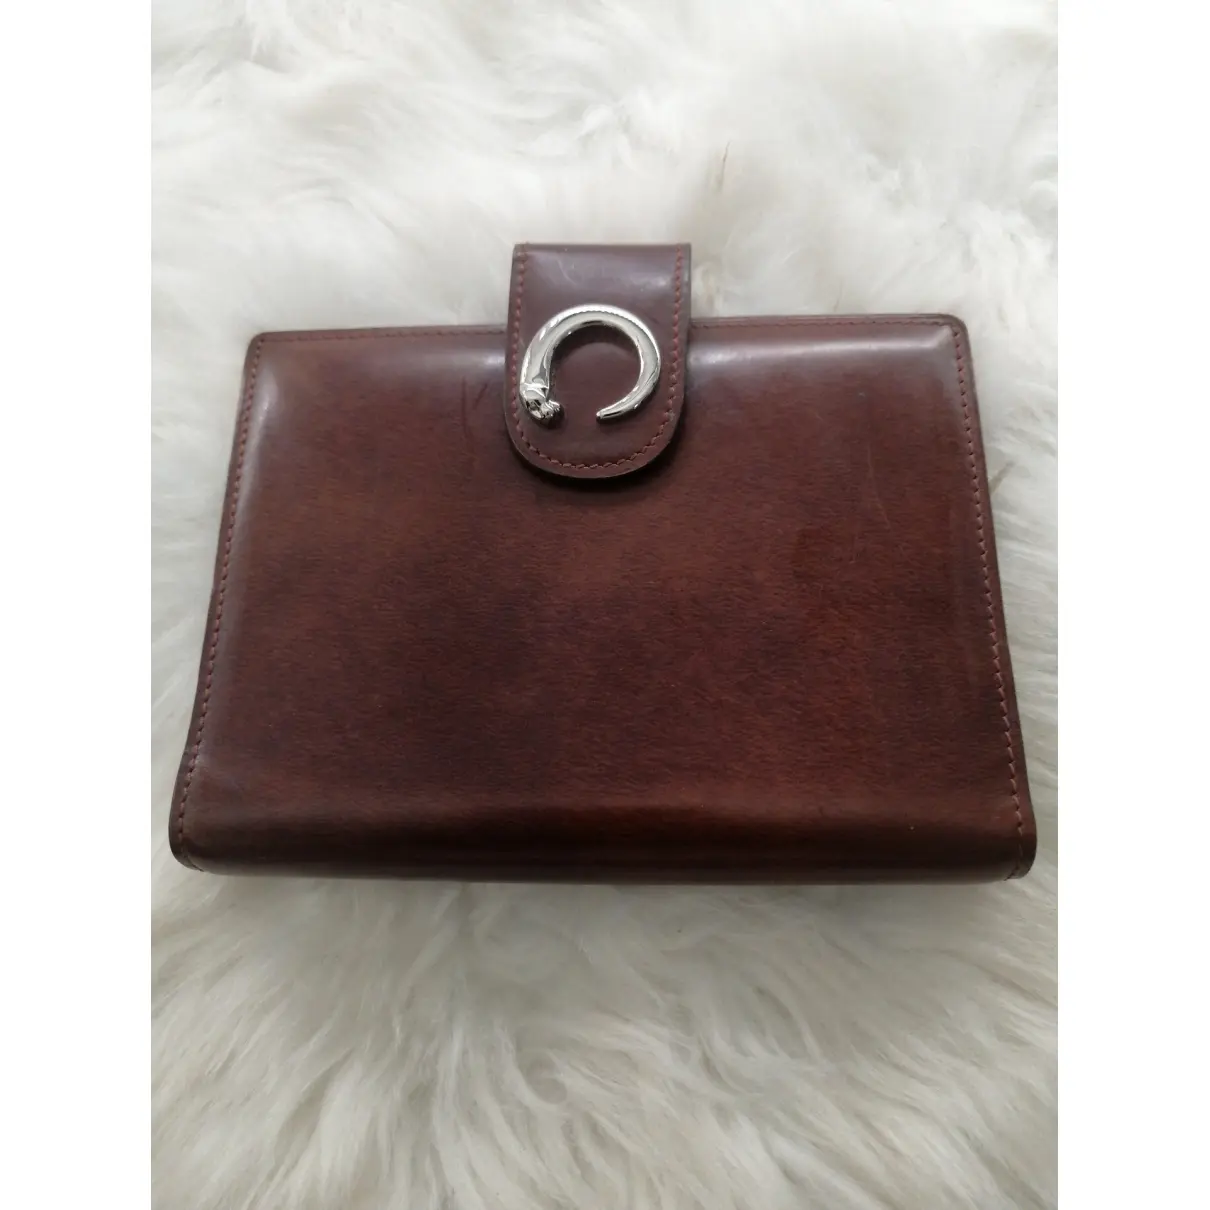 Buy Cartier Leather diary online - Vintage